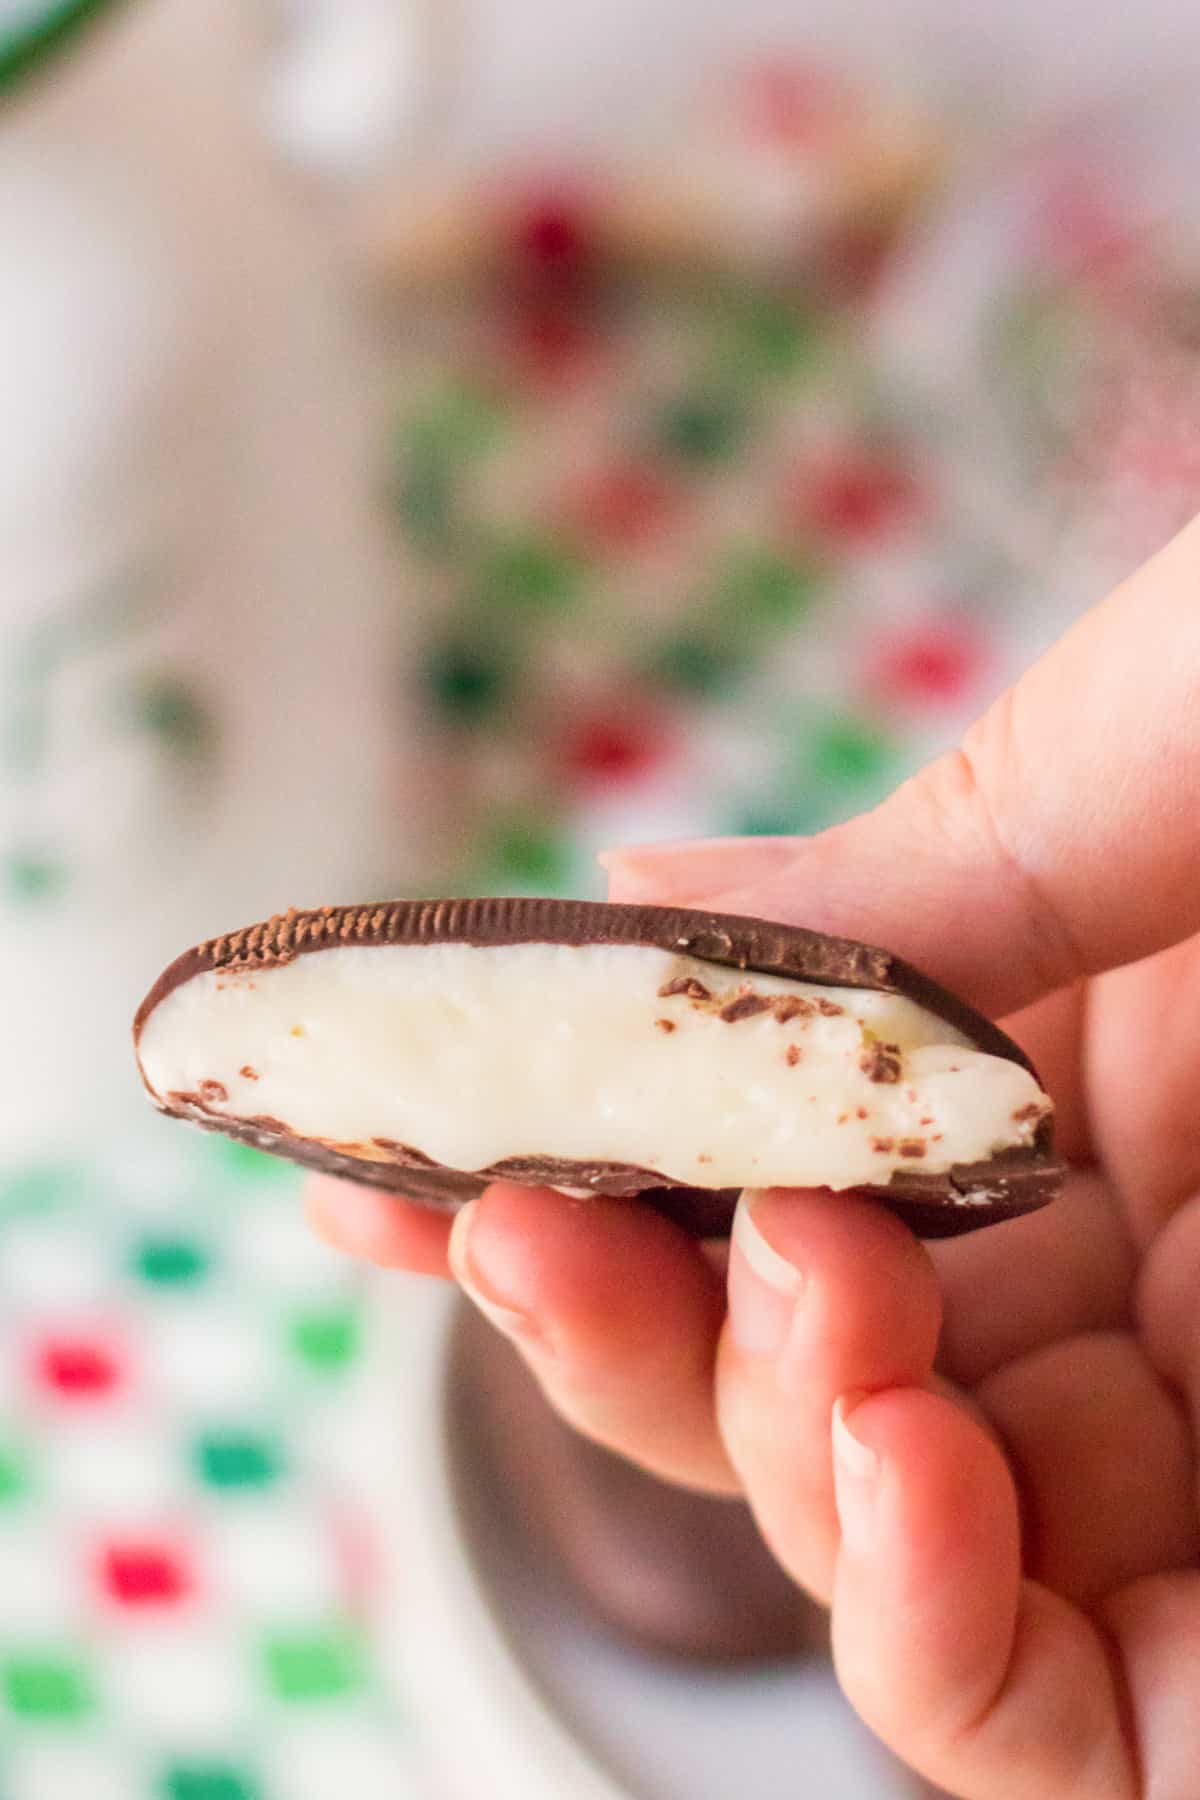 Homemade peppermint patty candy cut in half to show peppermint filling.